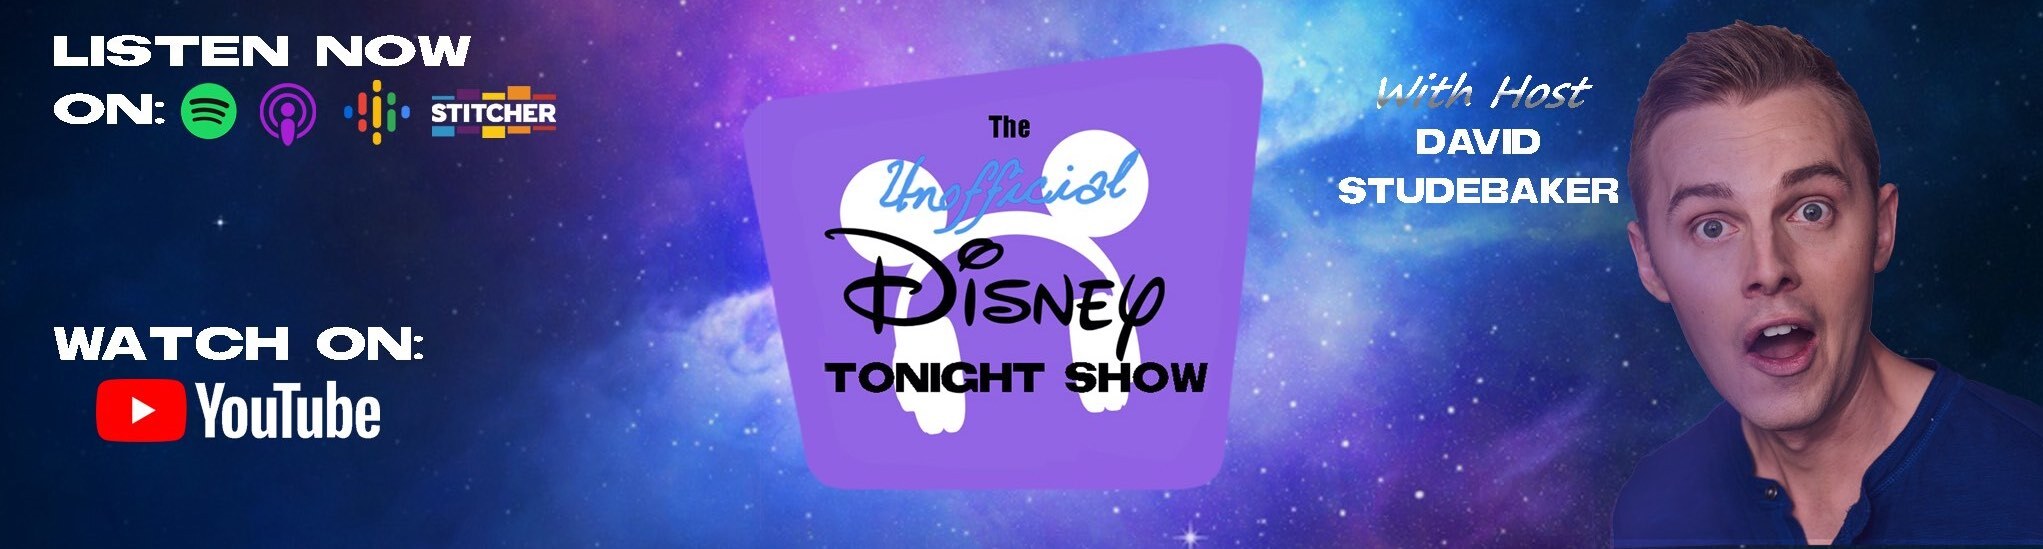 The Unofficial Disney Tonight Show